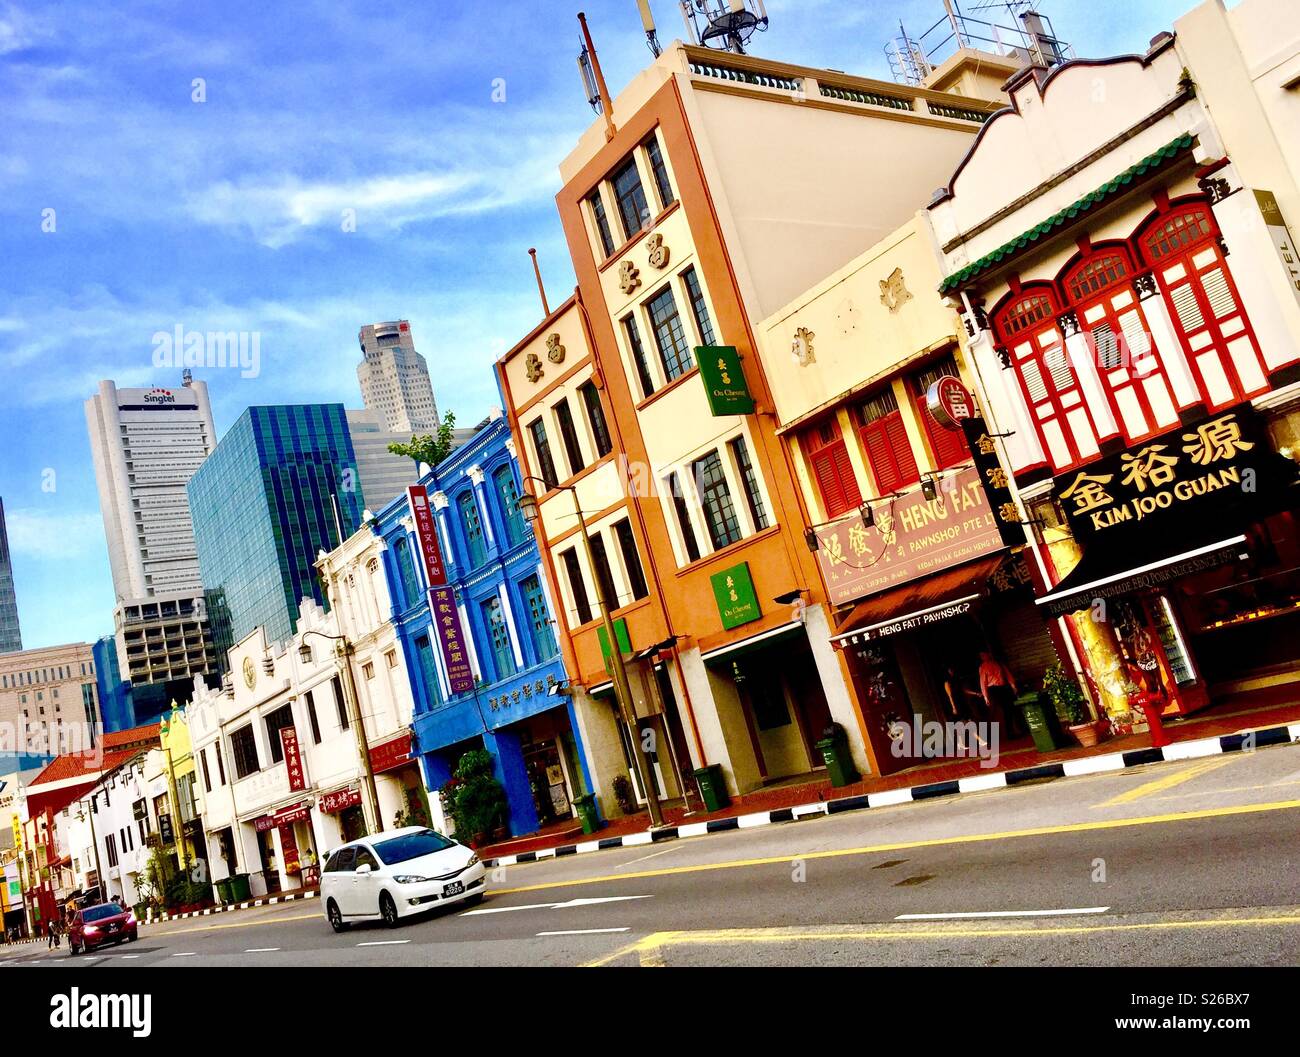 Conservative shophouses along South Bridge Road in Singapore's Chinatown Stock Photo